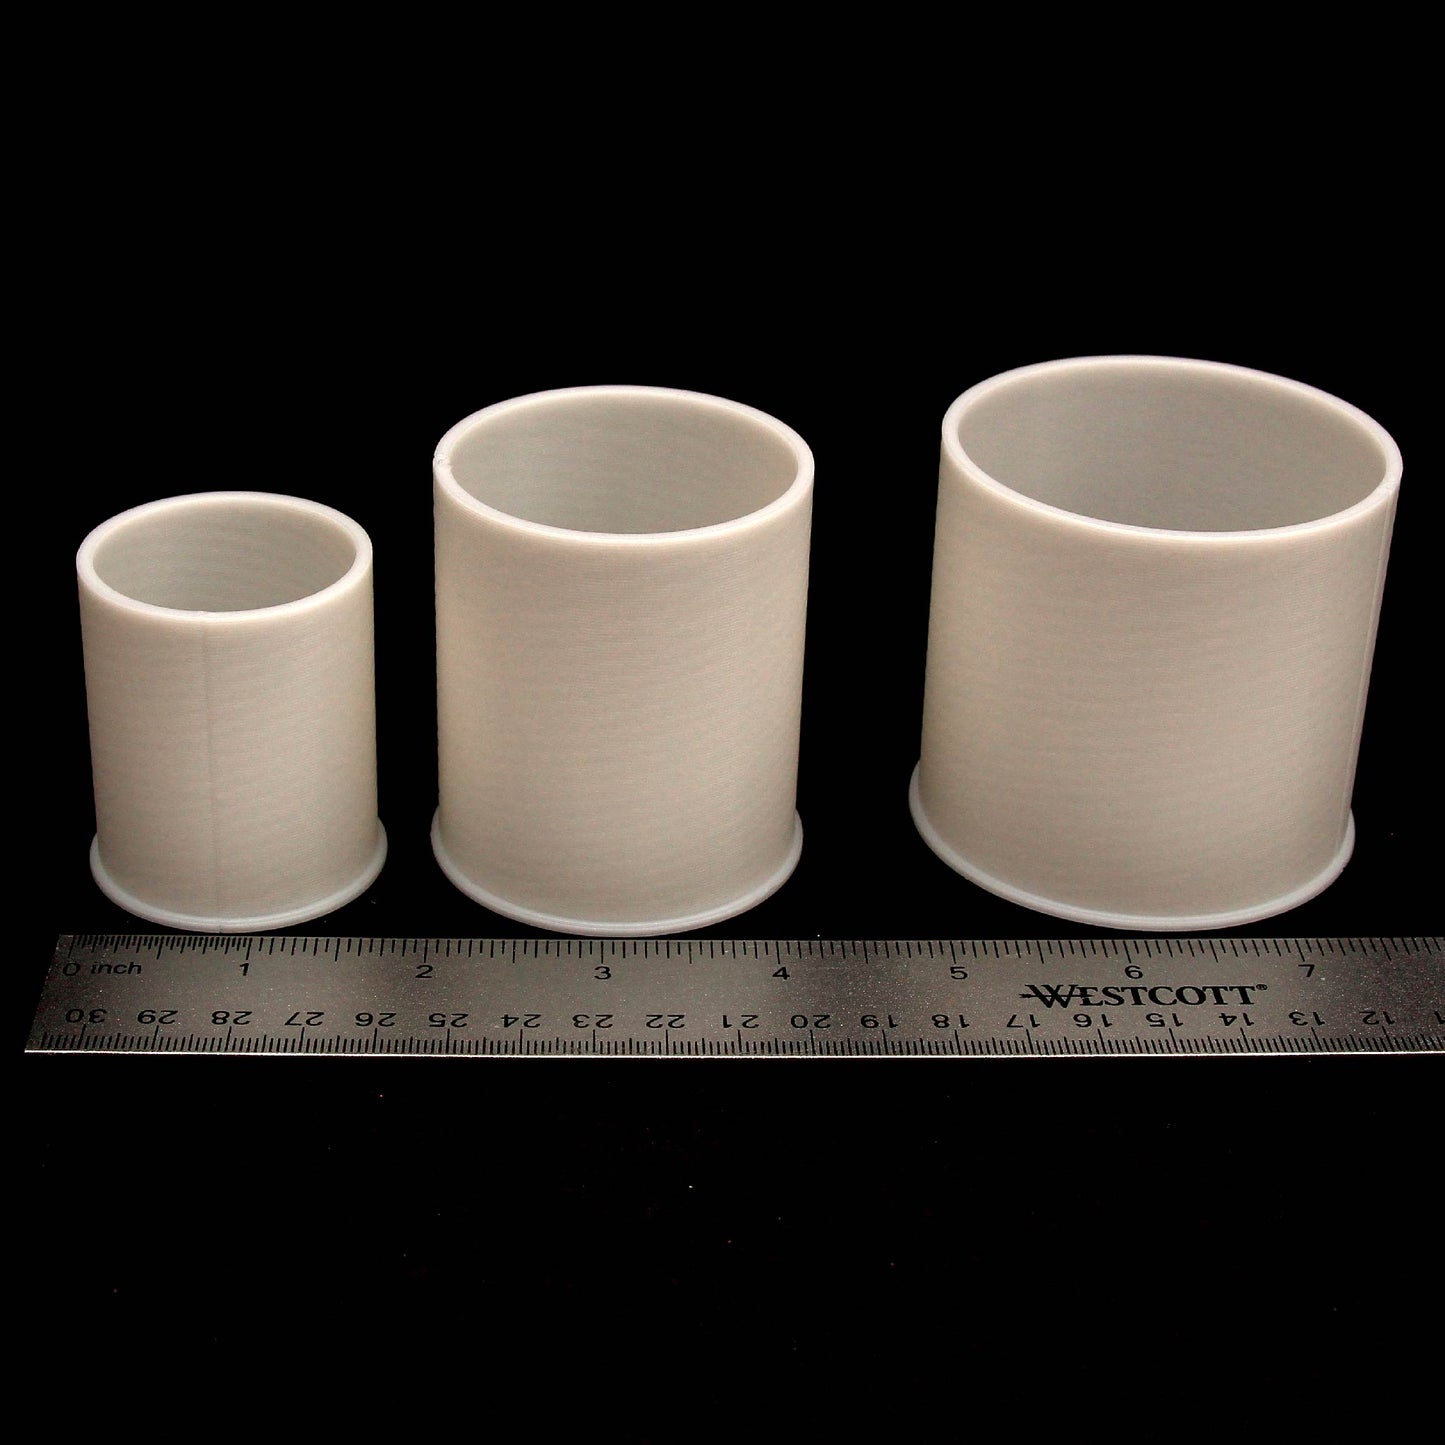 Bottomless Open Cups Set of 3